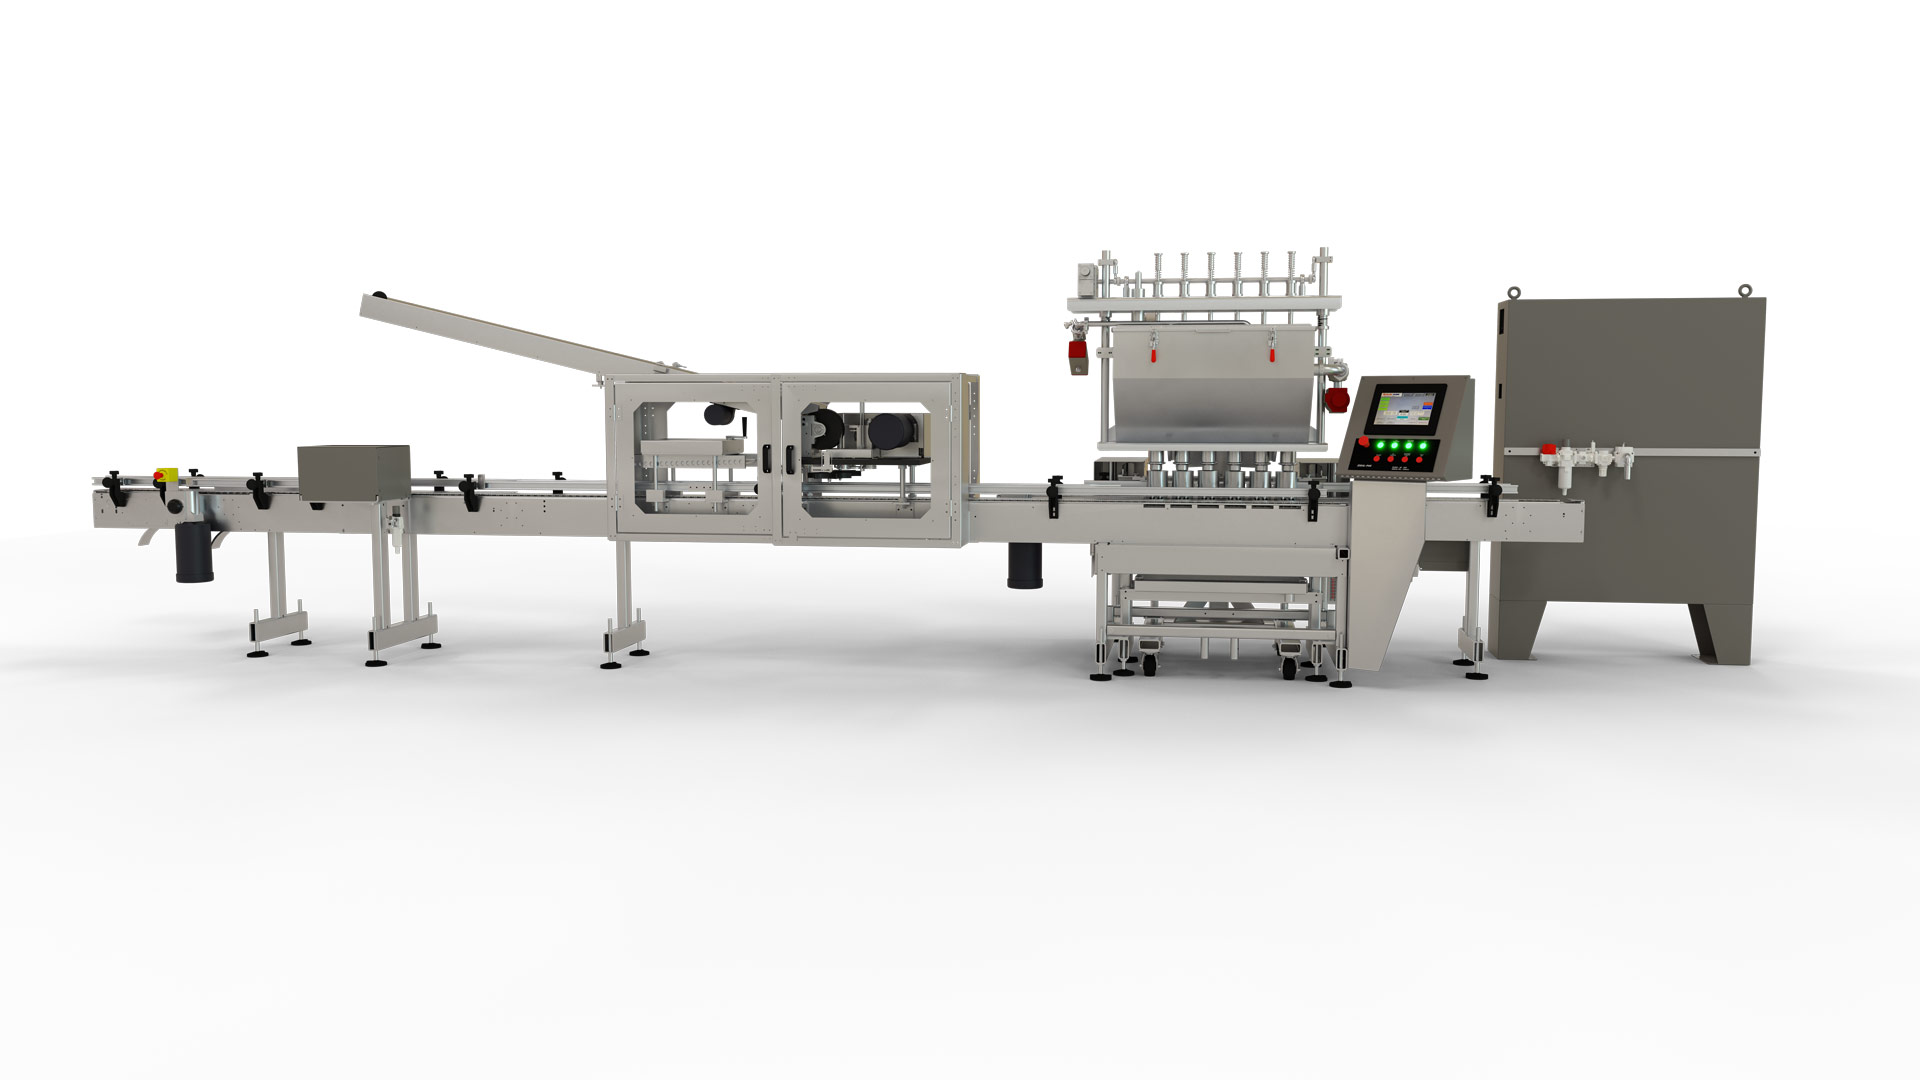 6 Head Automatic Liquid Filler with Linear Transfer and High Speed Lid Placer and Closer